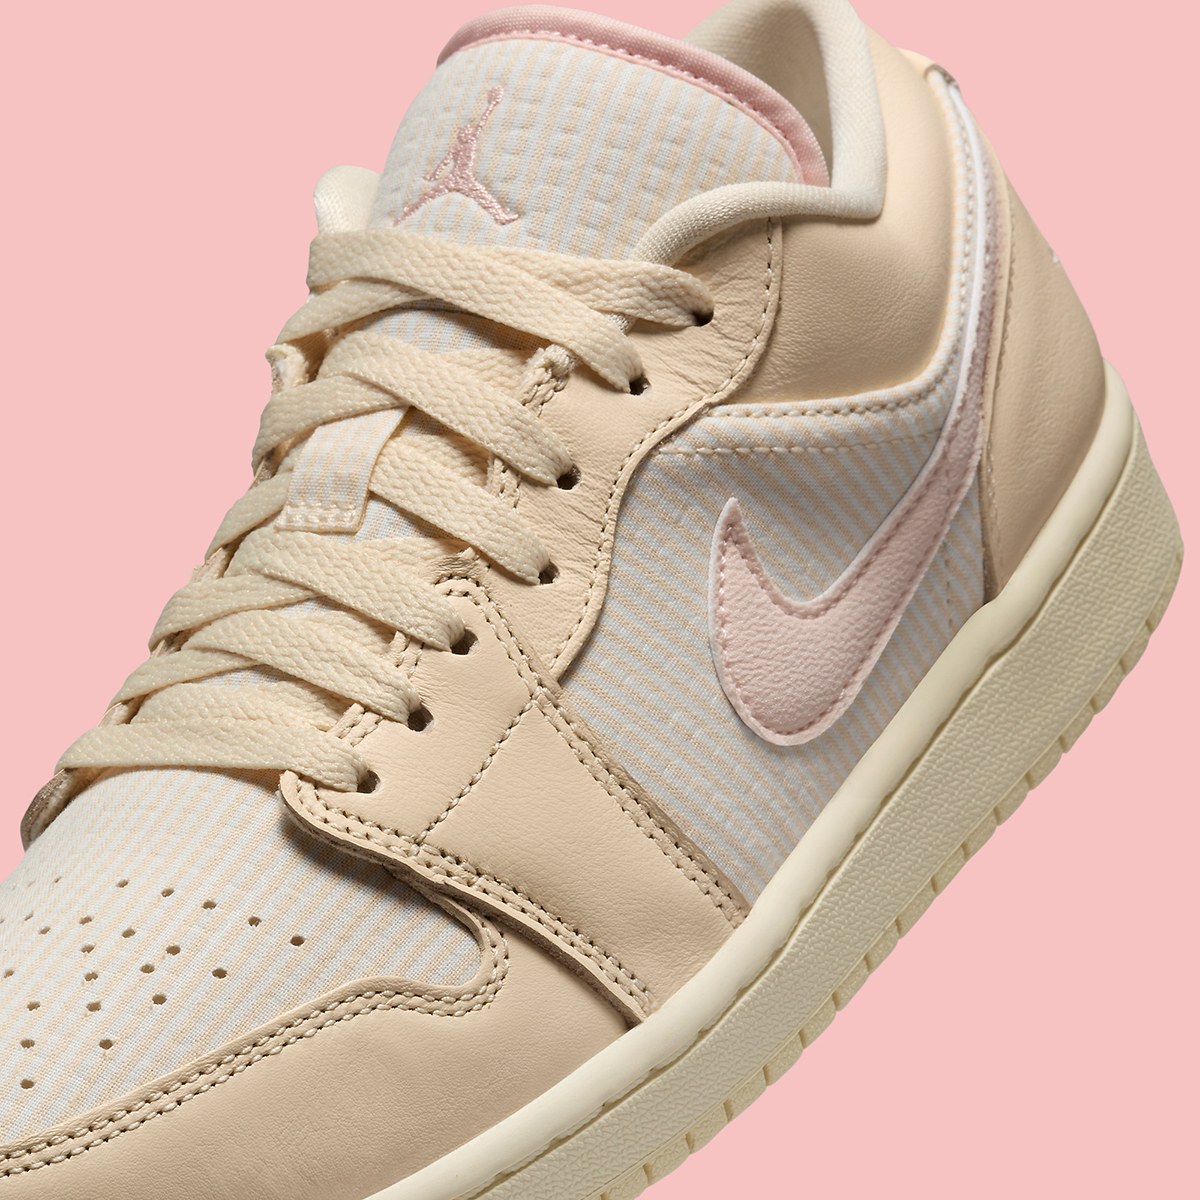 on Official Images of the Брендовые кроссовки nike air jordan 1 zoom fearless Low Lucky Green Linen Release Date 1